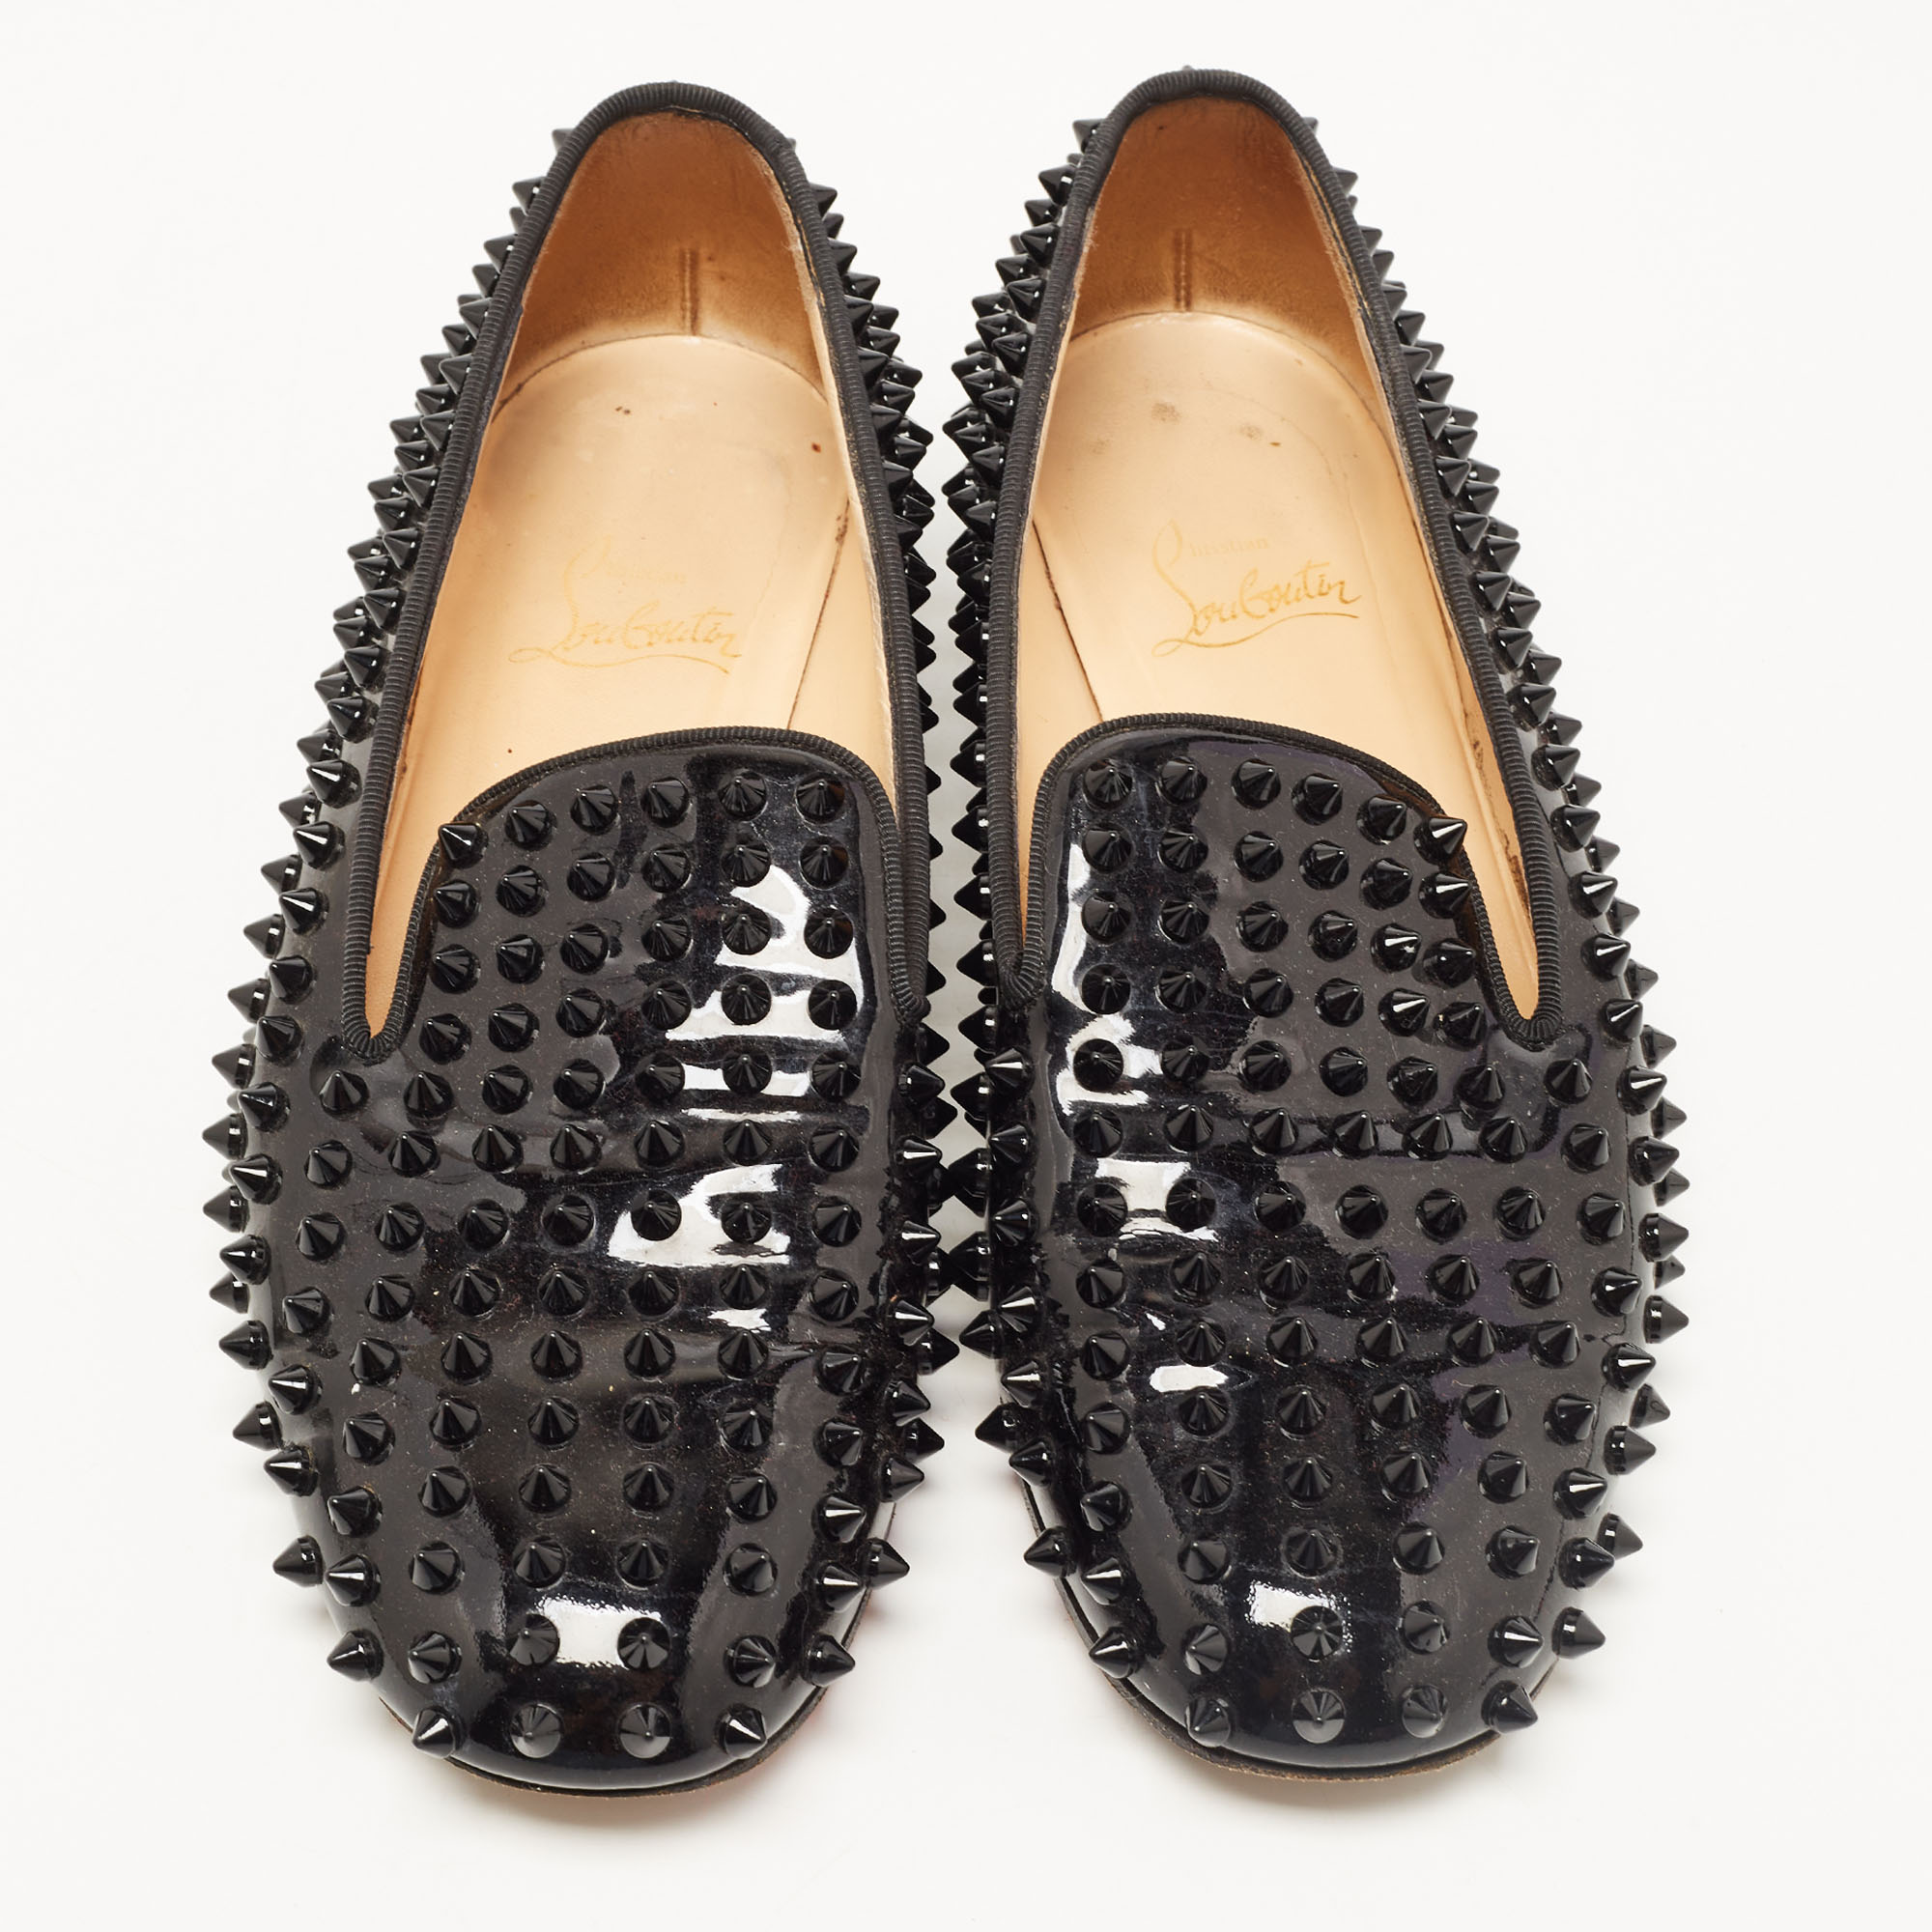 Christian Louboutin Black Patent Leather Dandelion Spikes Smoking Slippers Size 38